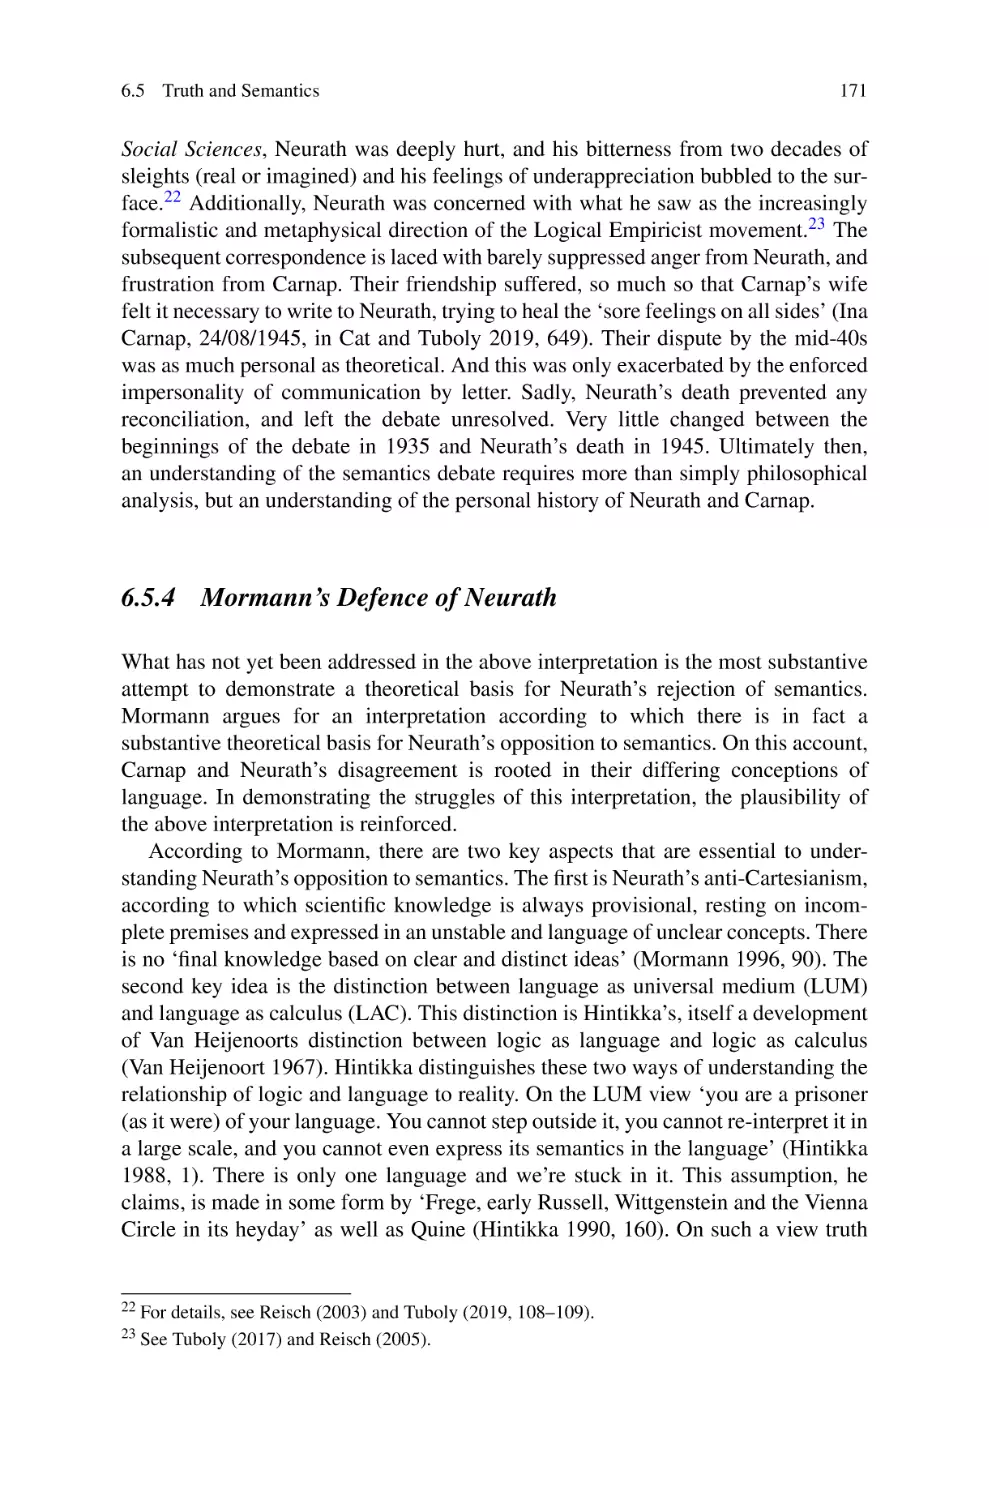 6.5.4 Mormann's Defence of Neurath